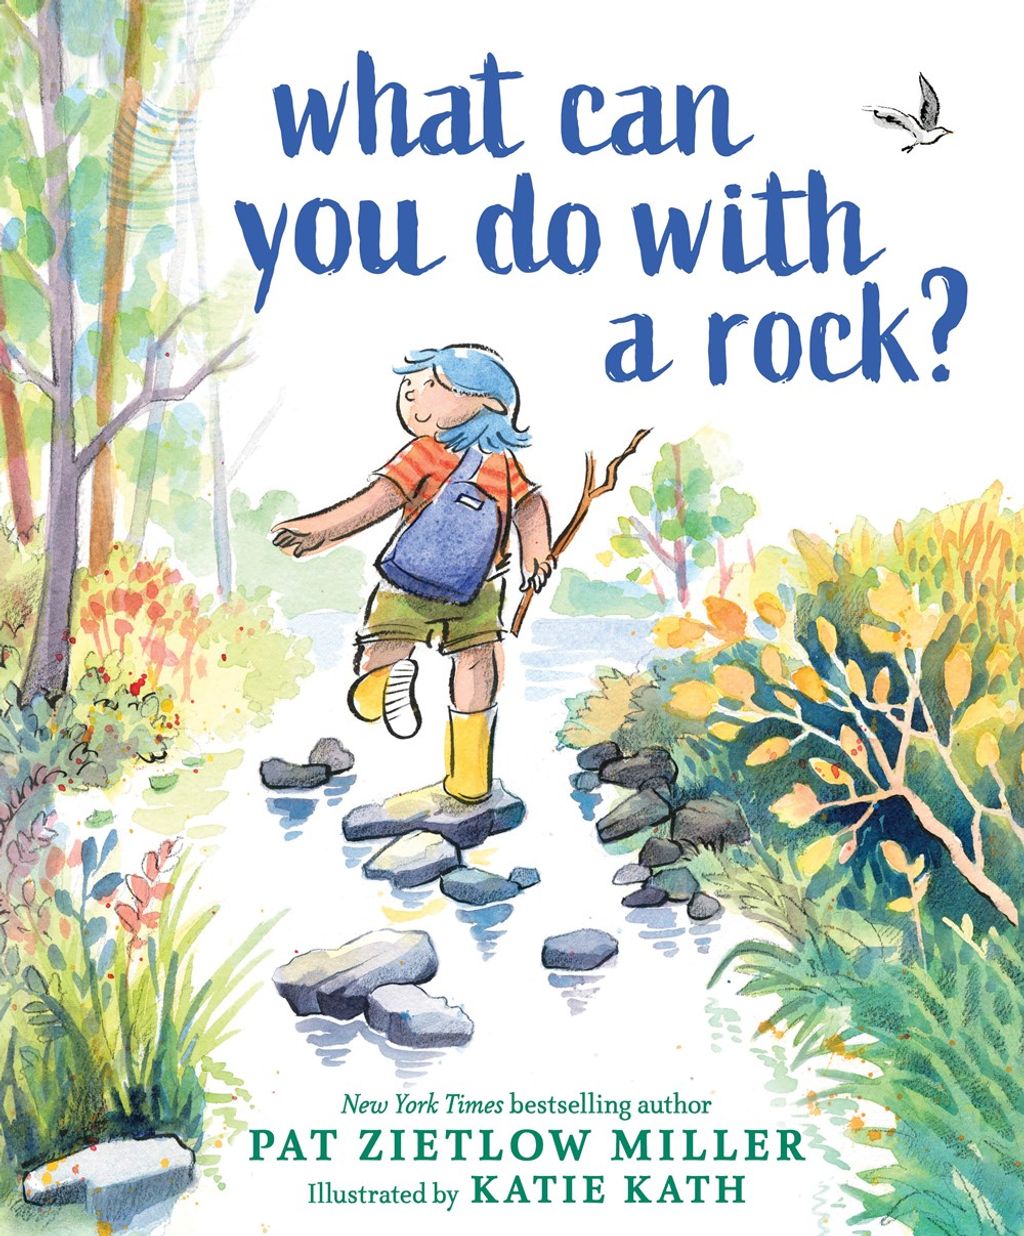 What Can You Do With a Rock? picture book cover